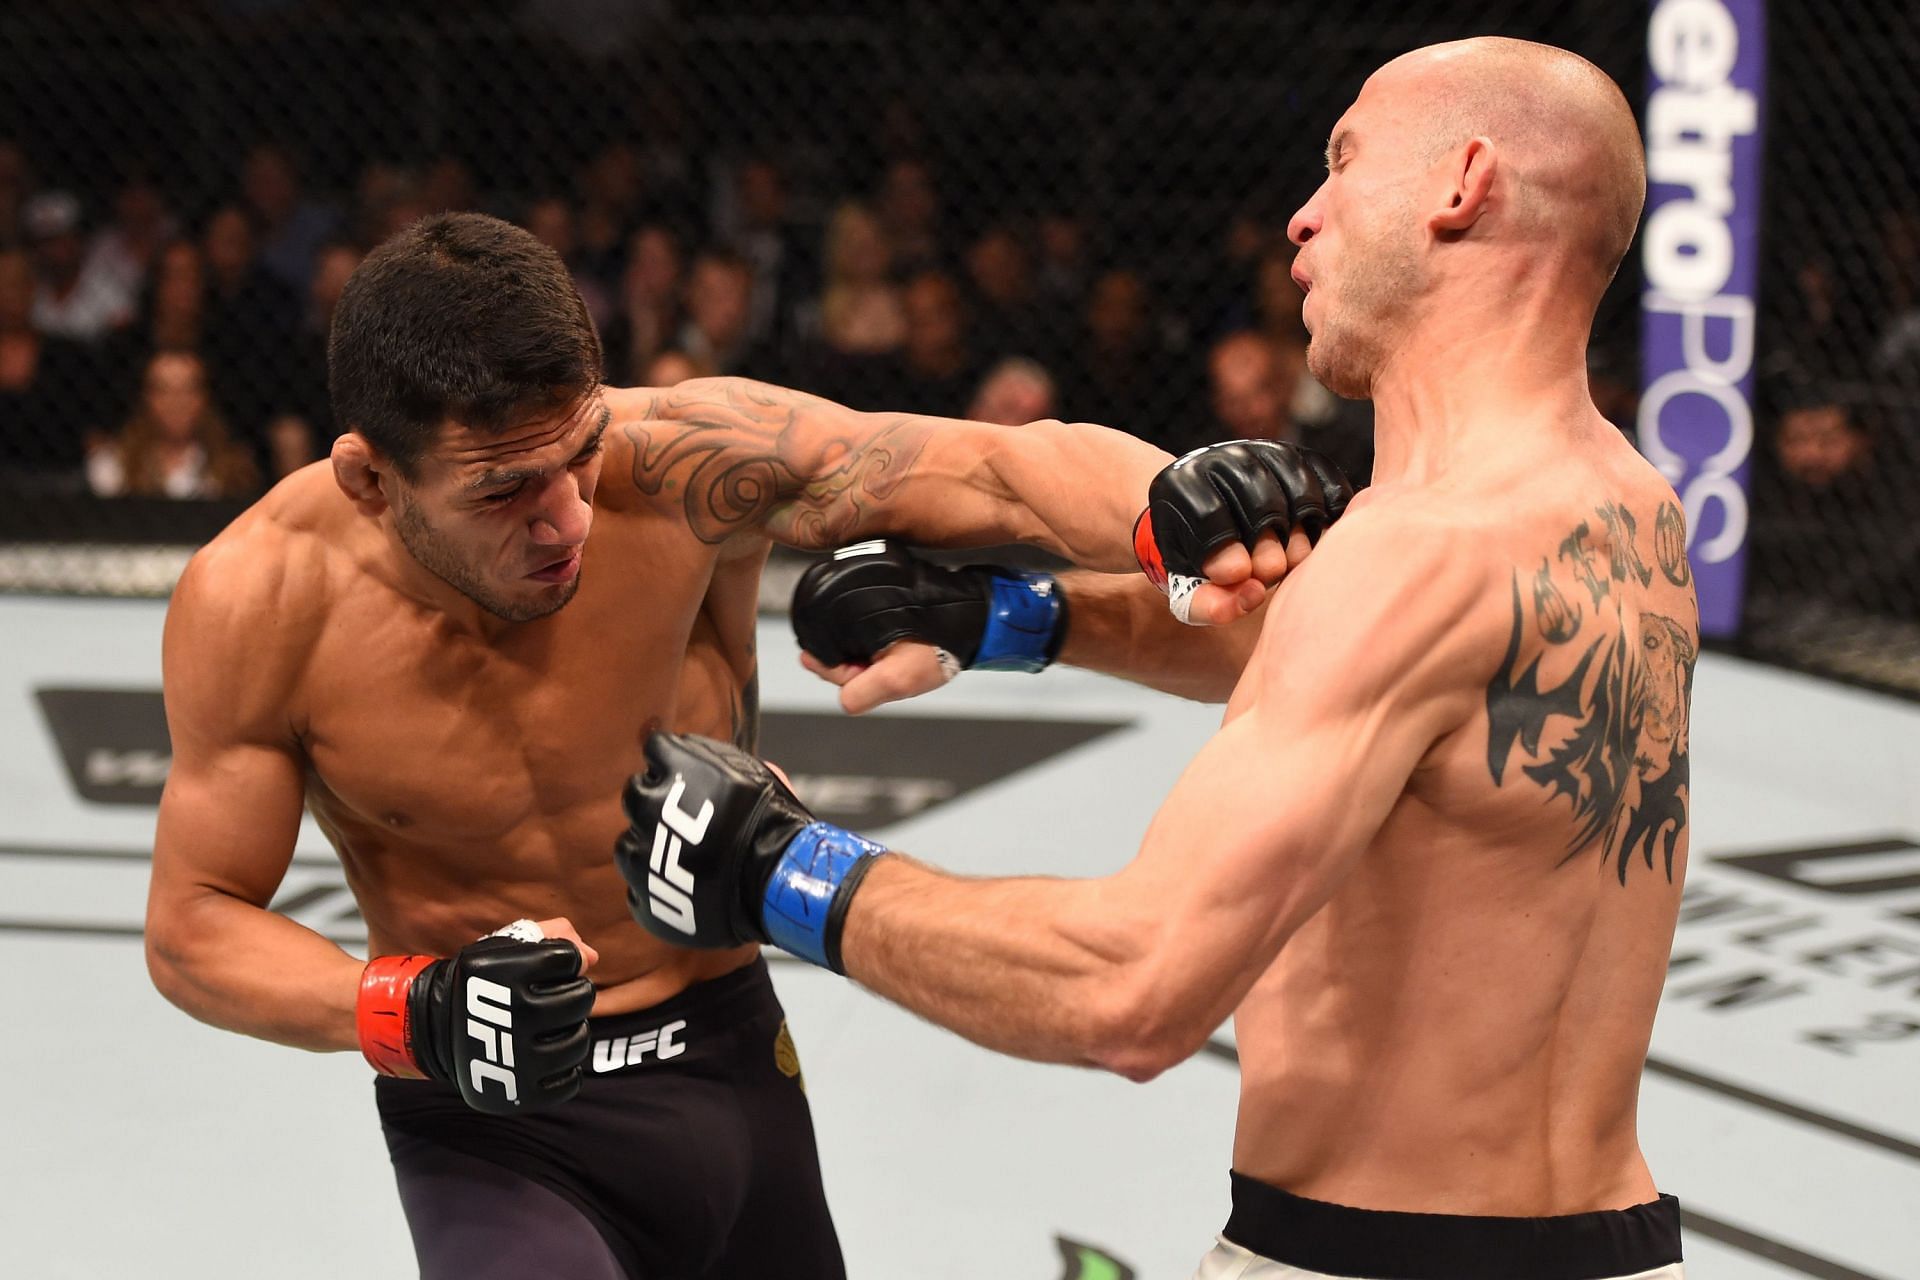 Rafael Dos Anjos&#039; UFC lightweight title defense against Donald Cerrone was shown for free on Fox